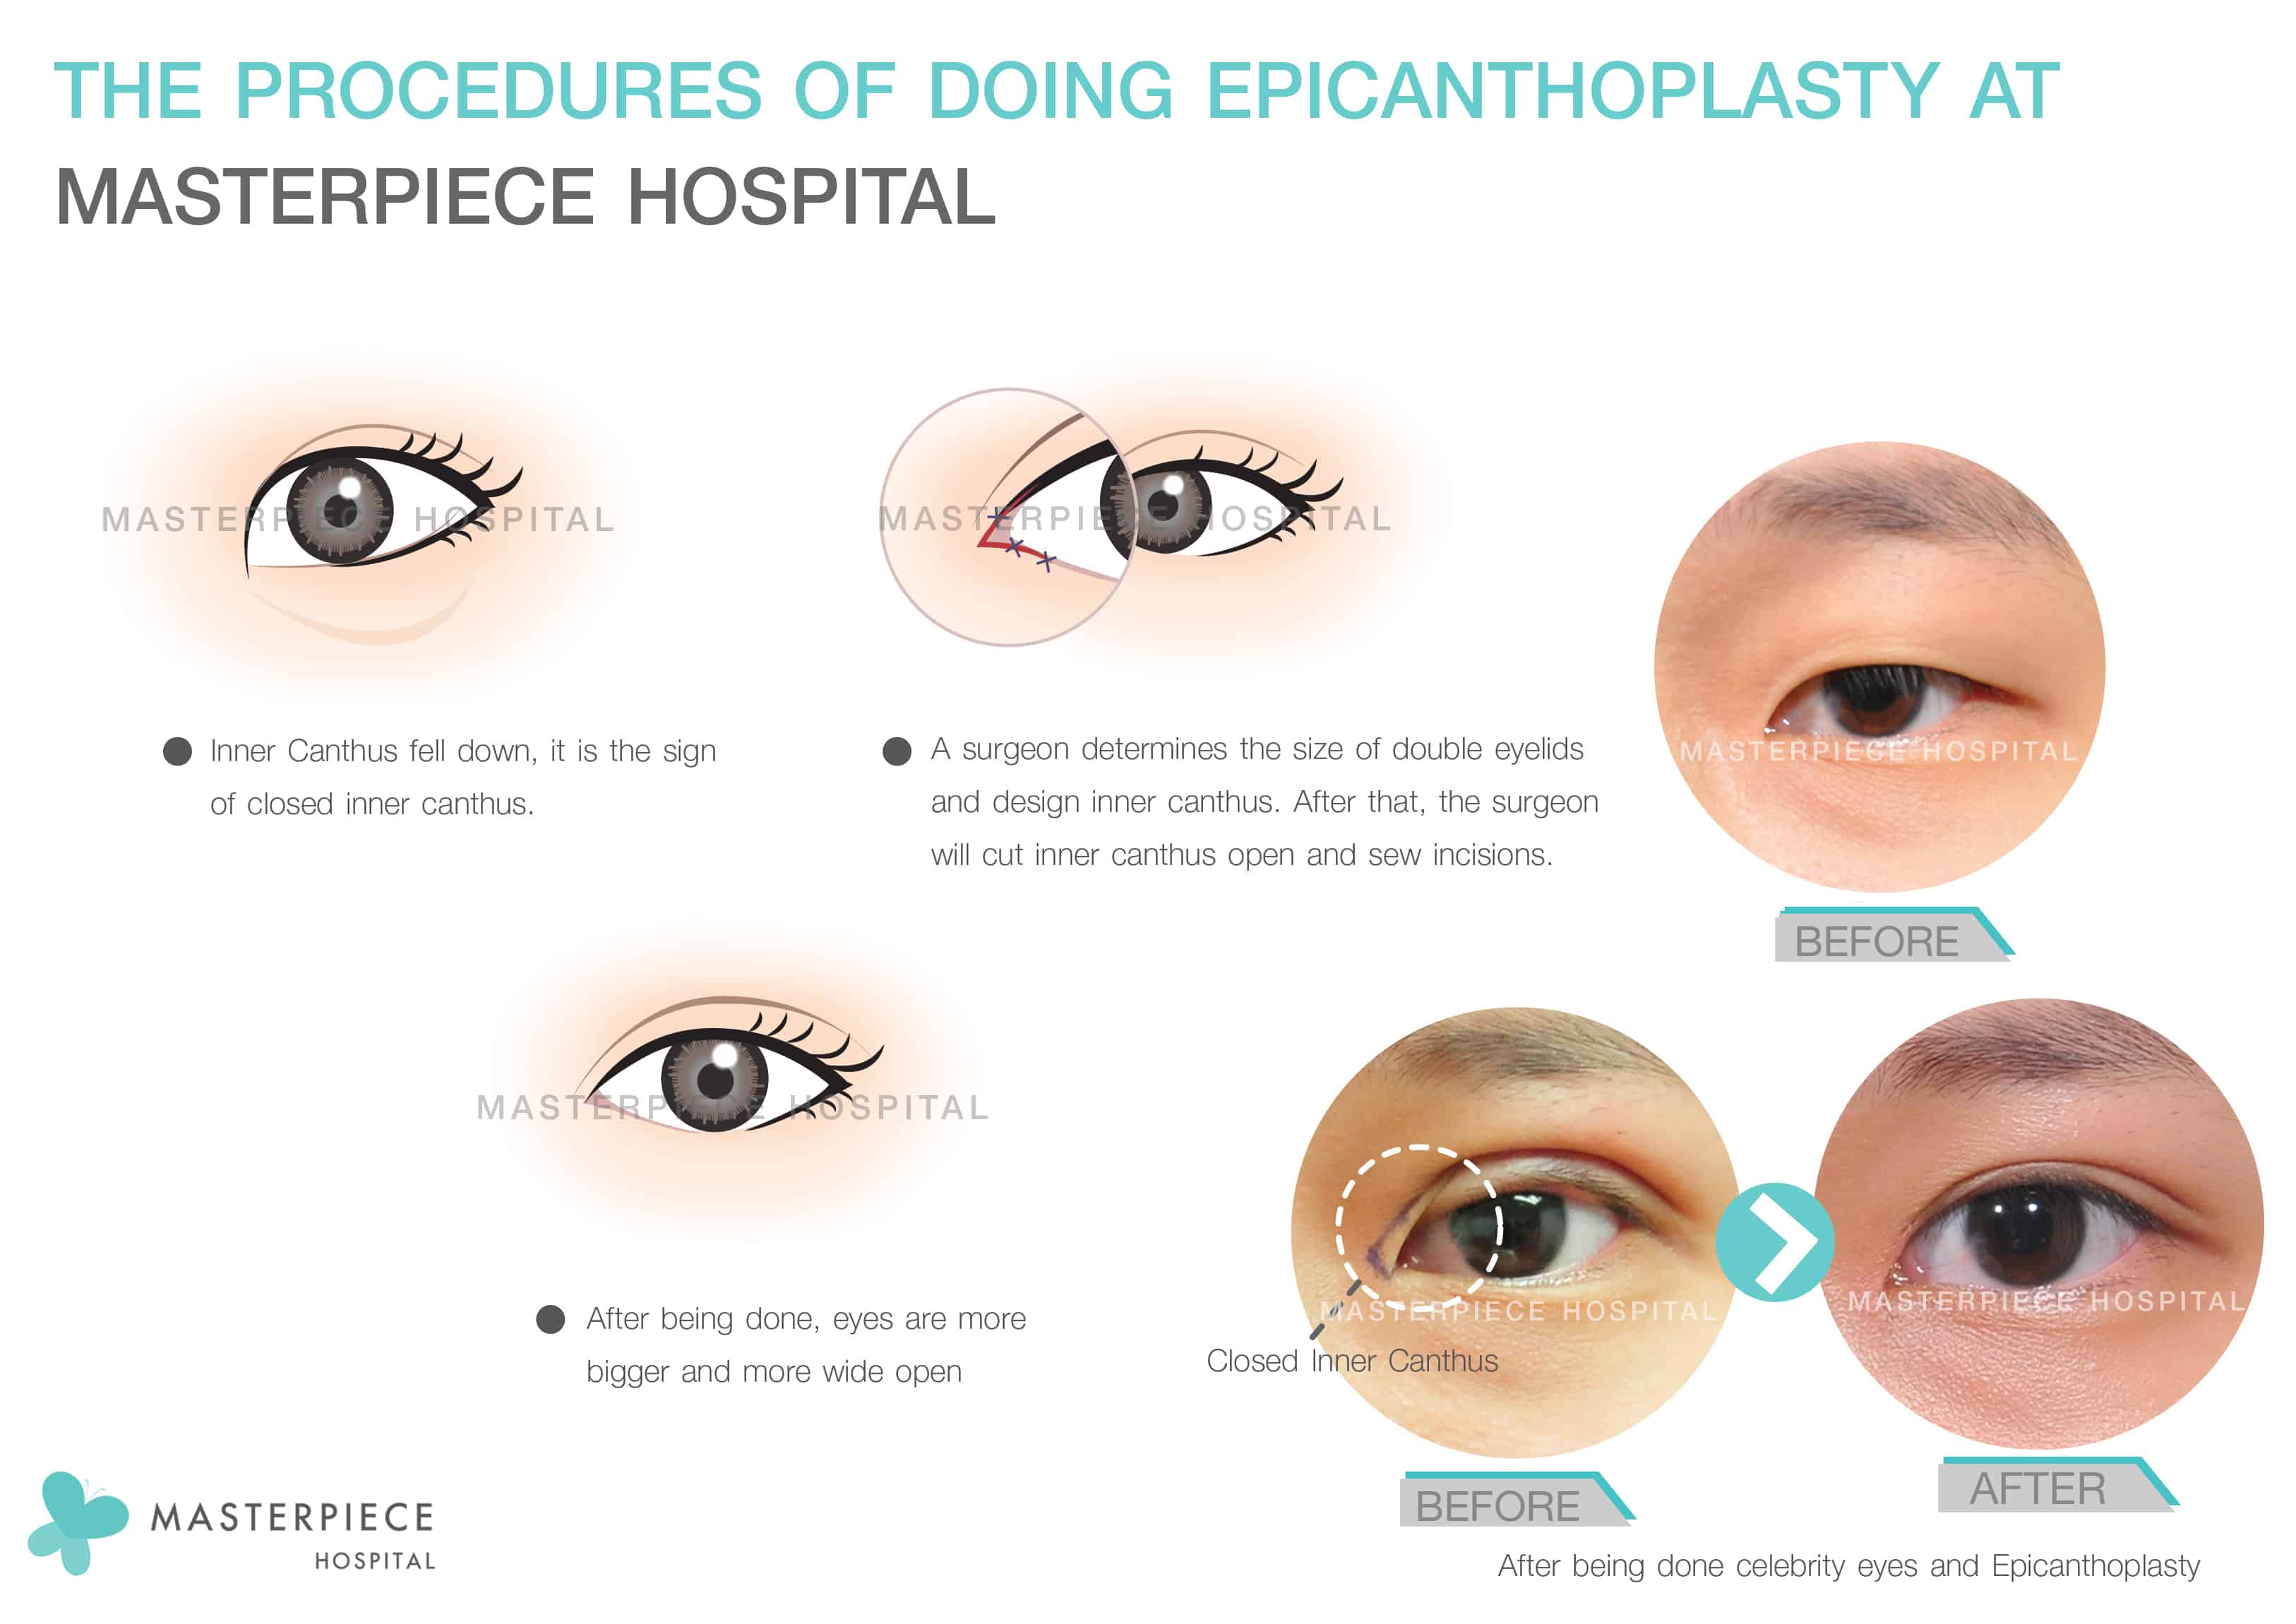 The procedures of doing Epicanthoplasty at Masterpiece Hospital